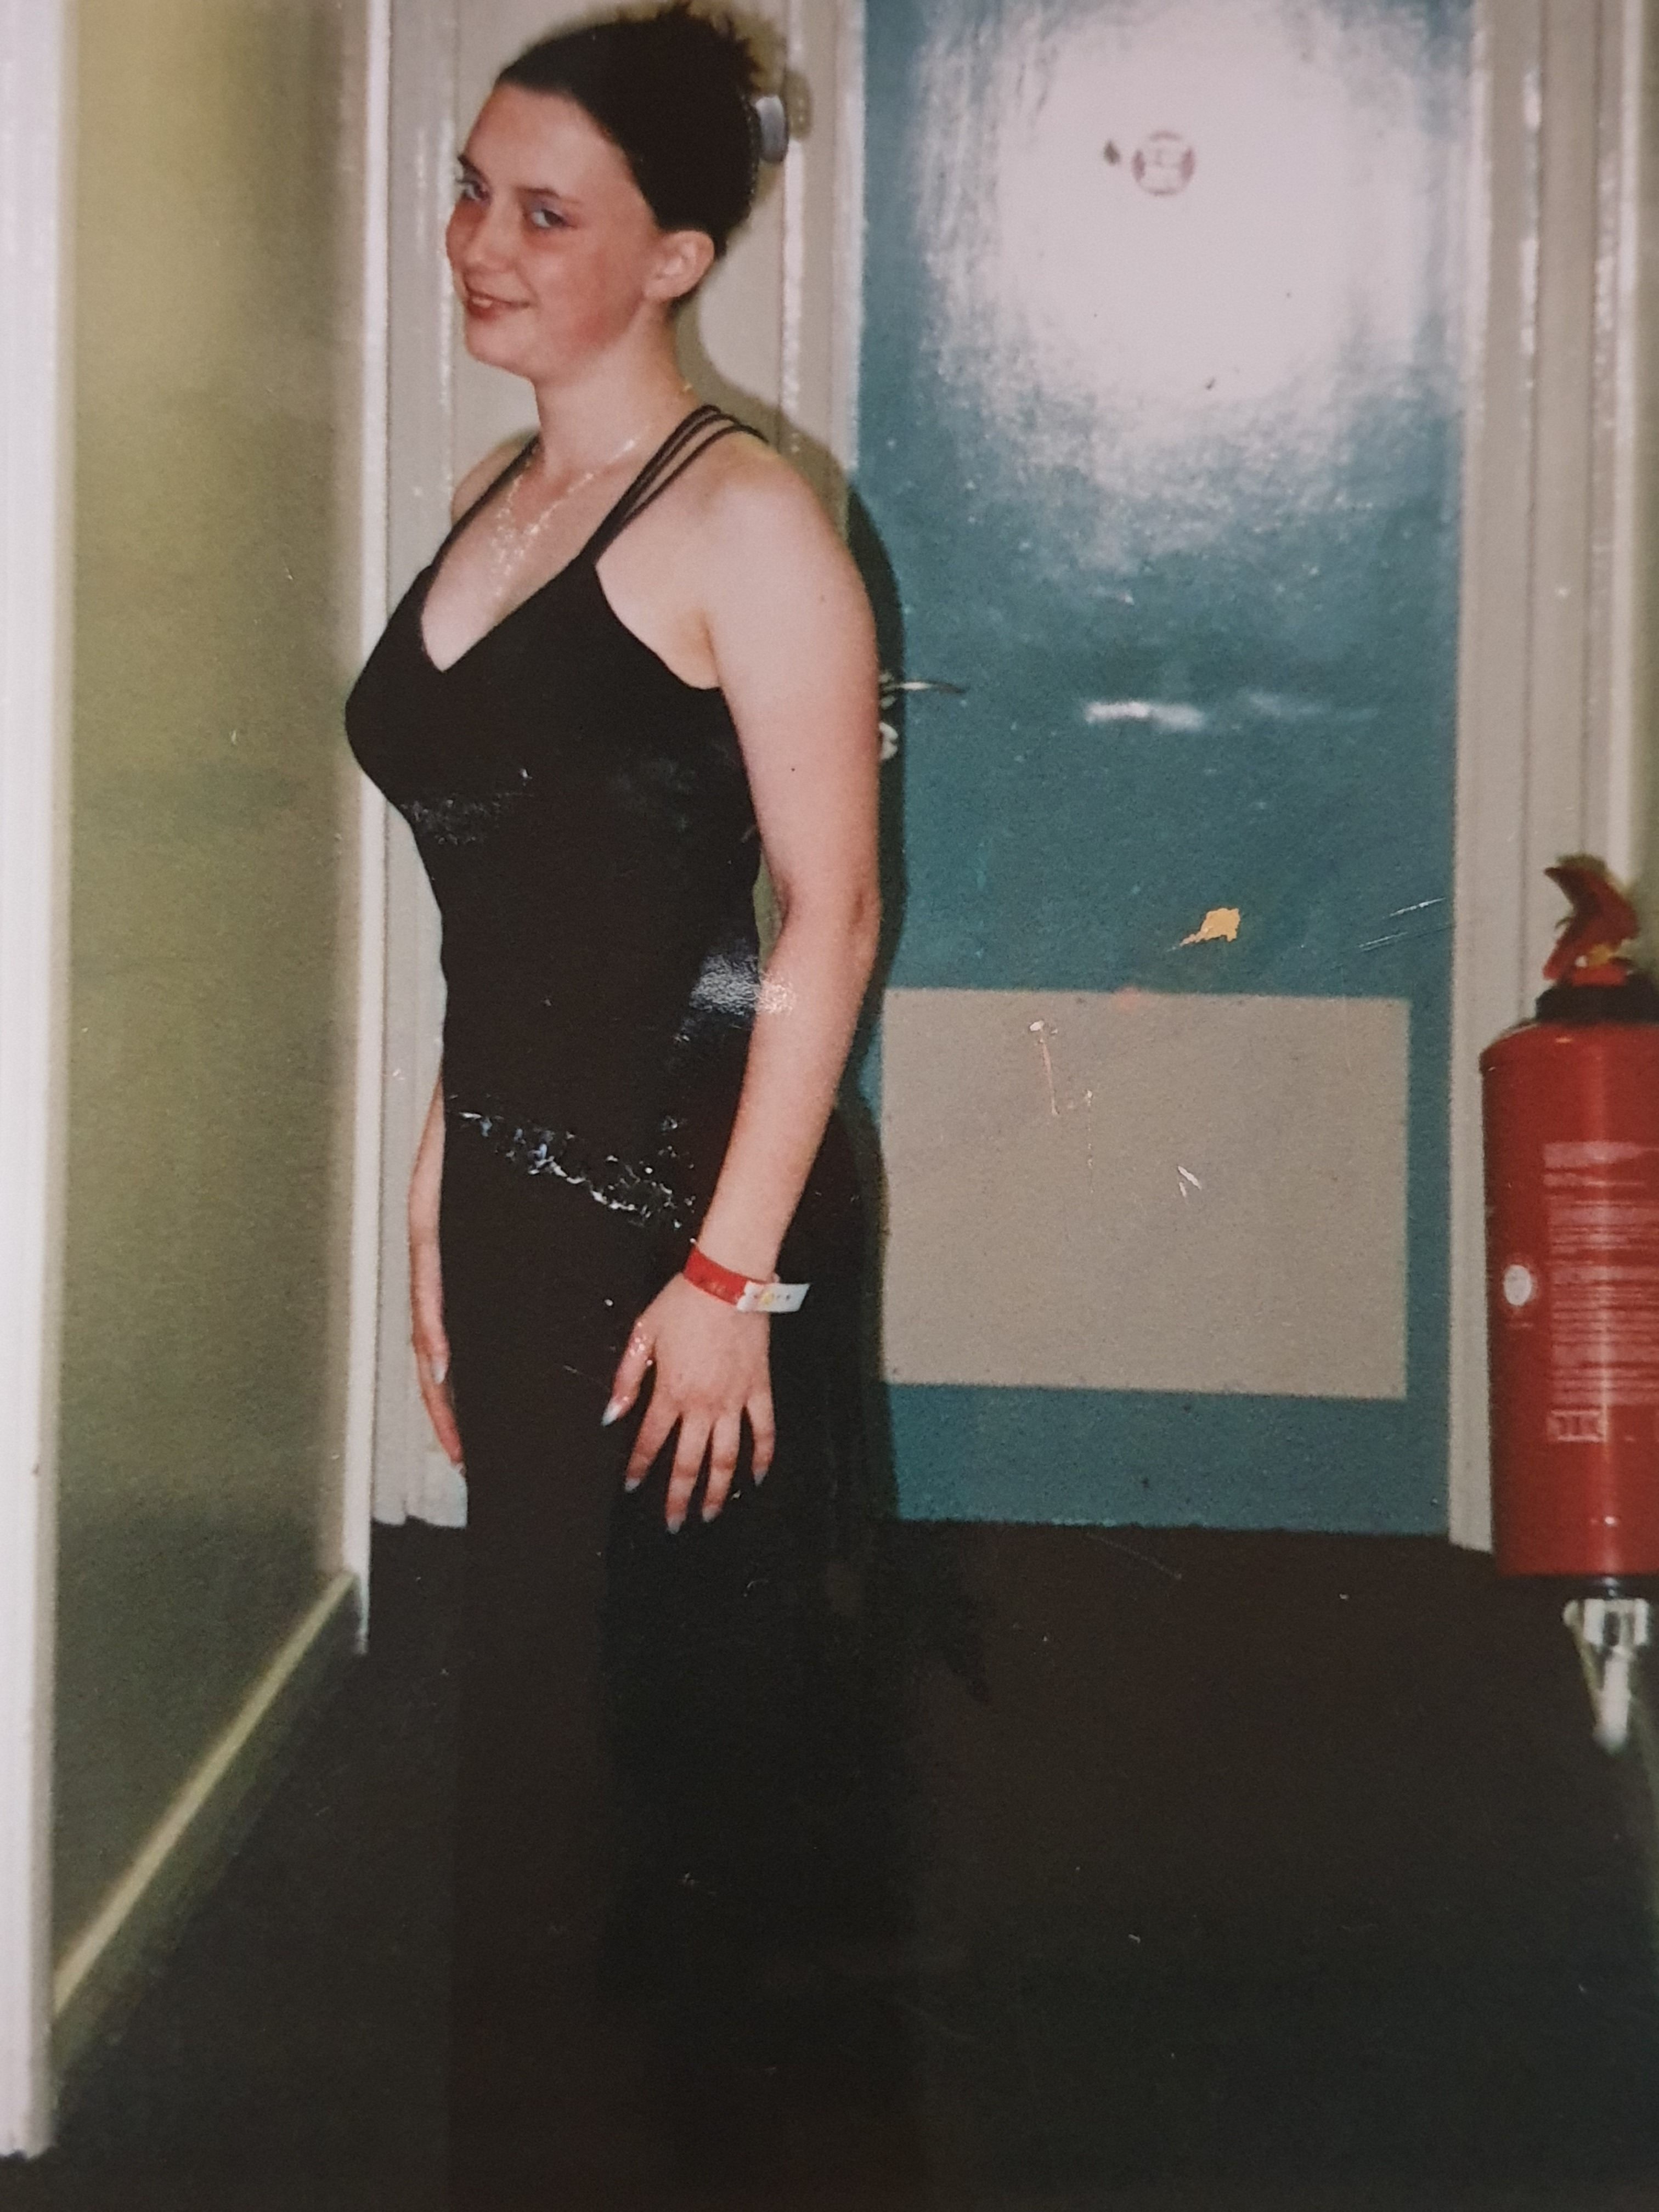 Claire in Penbrytn, preparing to go to the Aberystywth May Ball in 2003